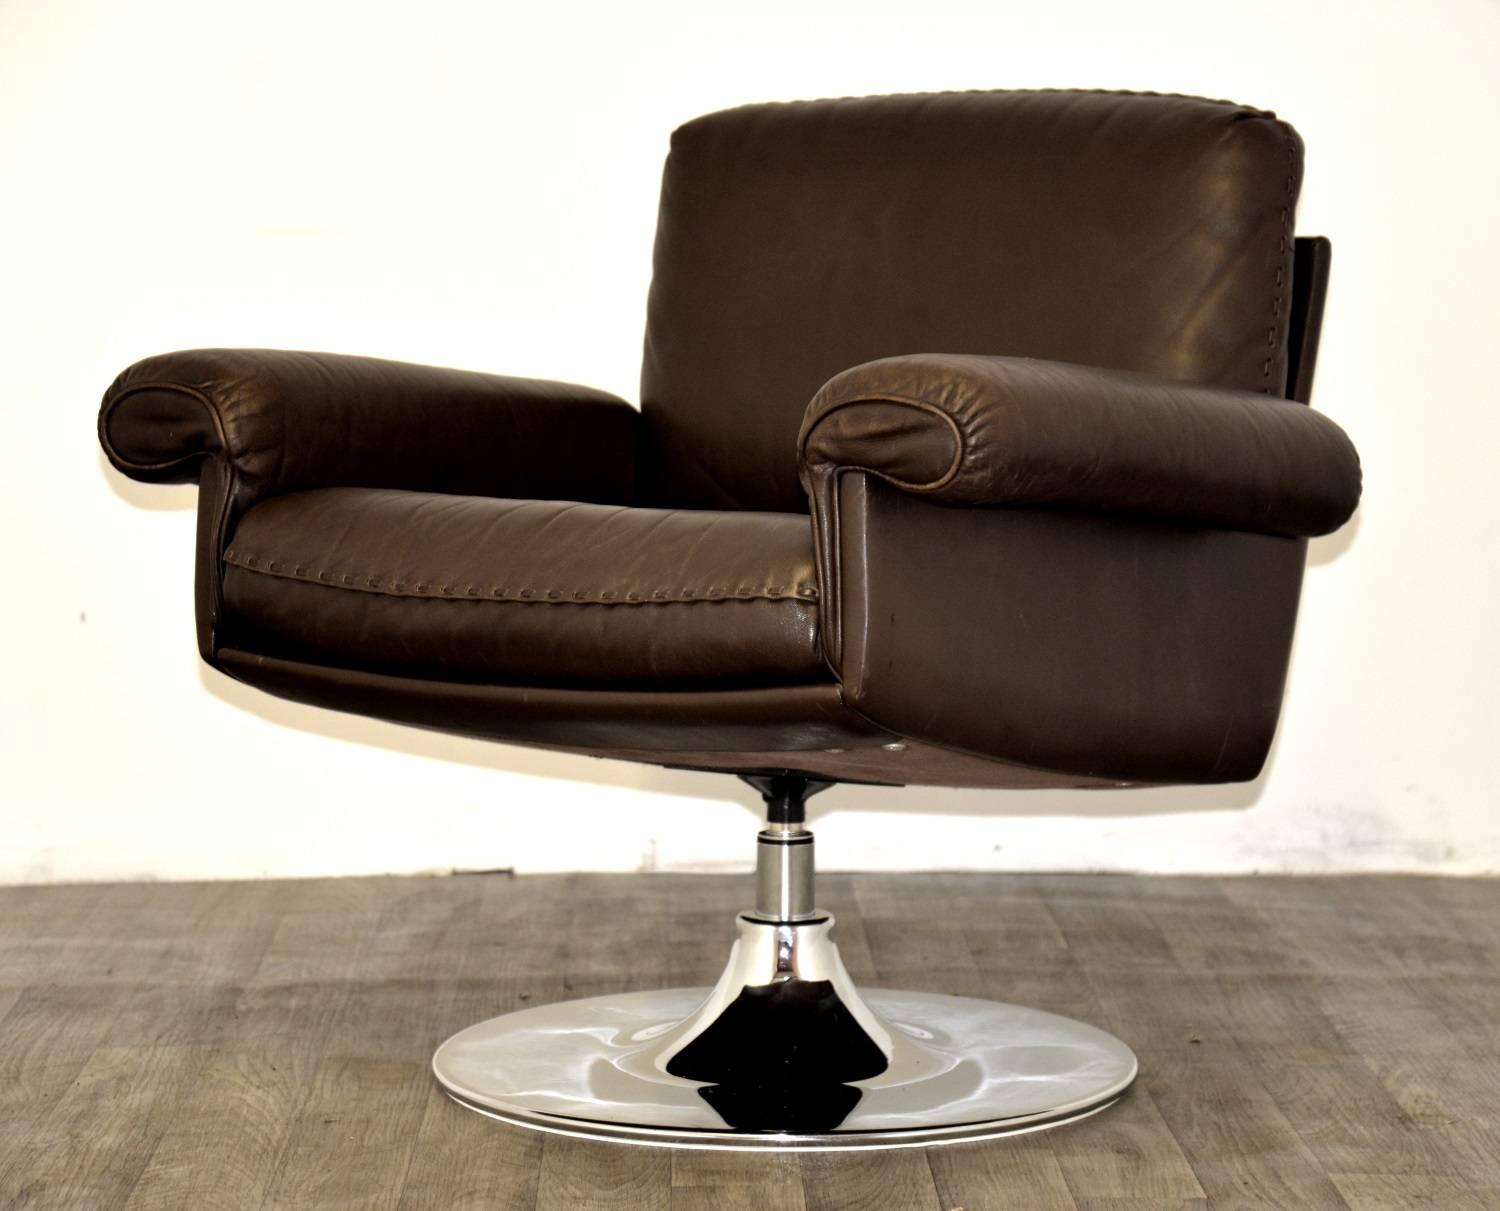 Discounted airfreight for our US and International customers (2 weeks door to door)


Vintage 1970s de Sede DS 31 lounge armchair in soft brown aniline leather with superb whipstitch edge detail. This swivel lounge armchair was built, circa 1970s by